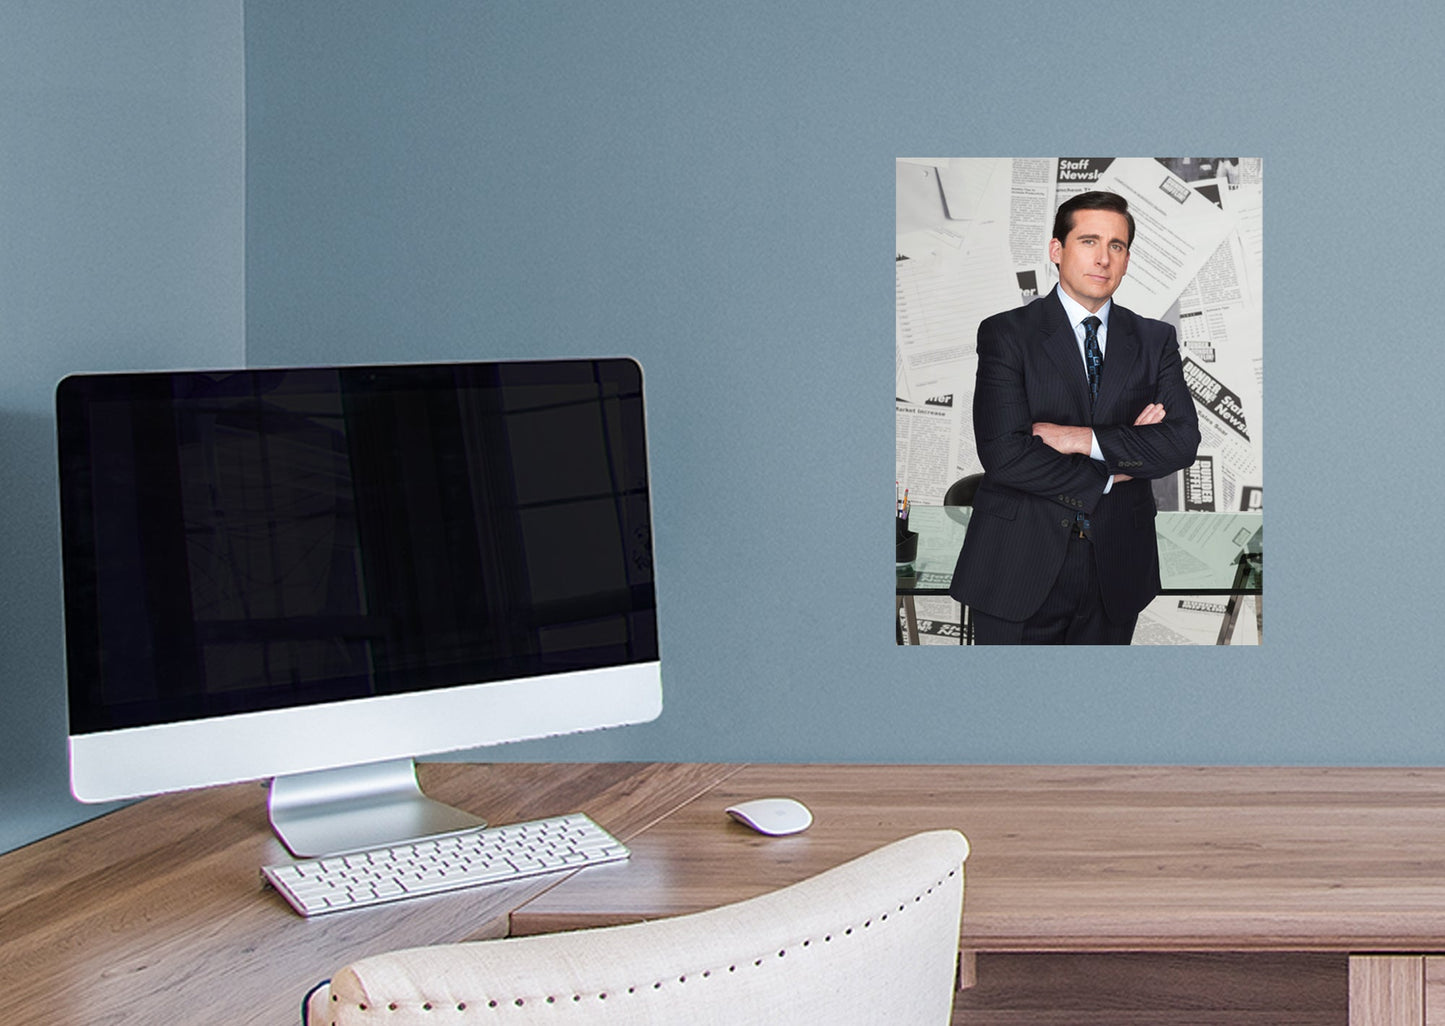 The Office: Michael Mural        - Officially Licensed NBC Universal Removable Wall   Adhesive Decal